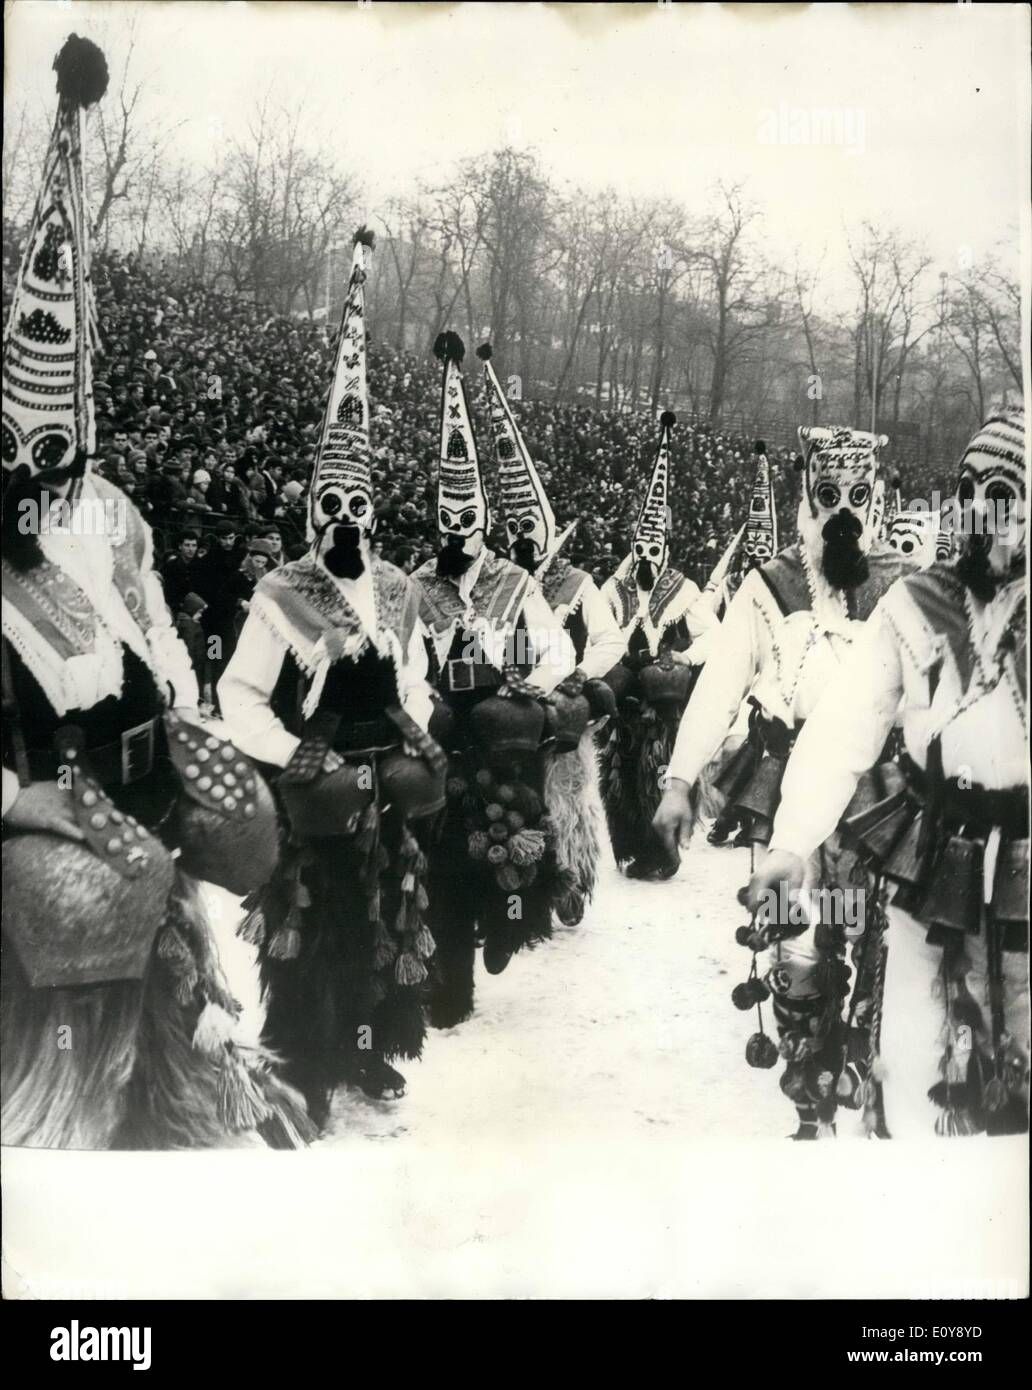 Feb. 02, 1969 - Folklore Festival Of Mummers In Bulgaria. The Third Folklore Festival of Mummers was held in the town of Pernik, Bulgaria. The mummer games emerged in the remote primitiveness of the Old Bulgarians. They were intended symbolically to inspire fear and terror in the ''evil forces'' threatening the farmer and his labour throughout the year, to chase away diseases, beasts of prey, hail - storms, droughts and crop failures so that there may be abundant harvests, good health, happiness and progress in everything. Photo shows scene during the colorful Folklore Festival of Mummers. Stock Photo